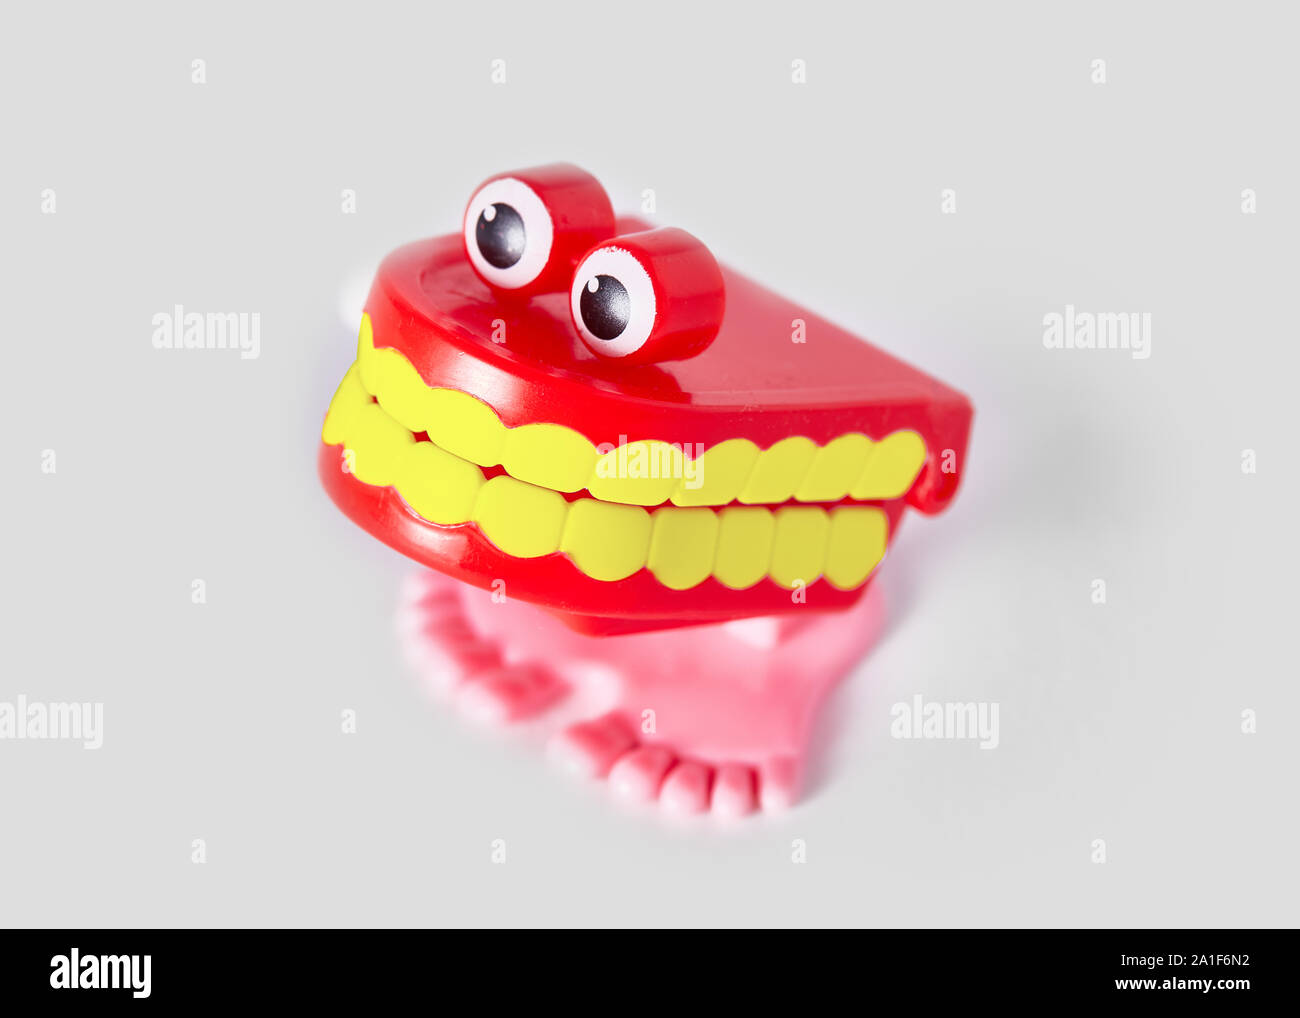 Chattering teeth toy Stock Photo